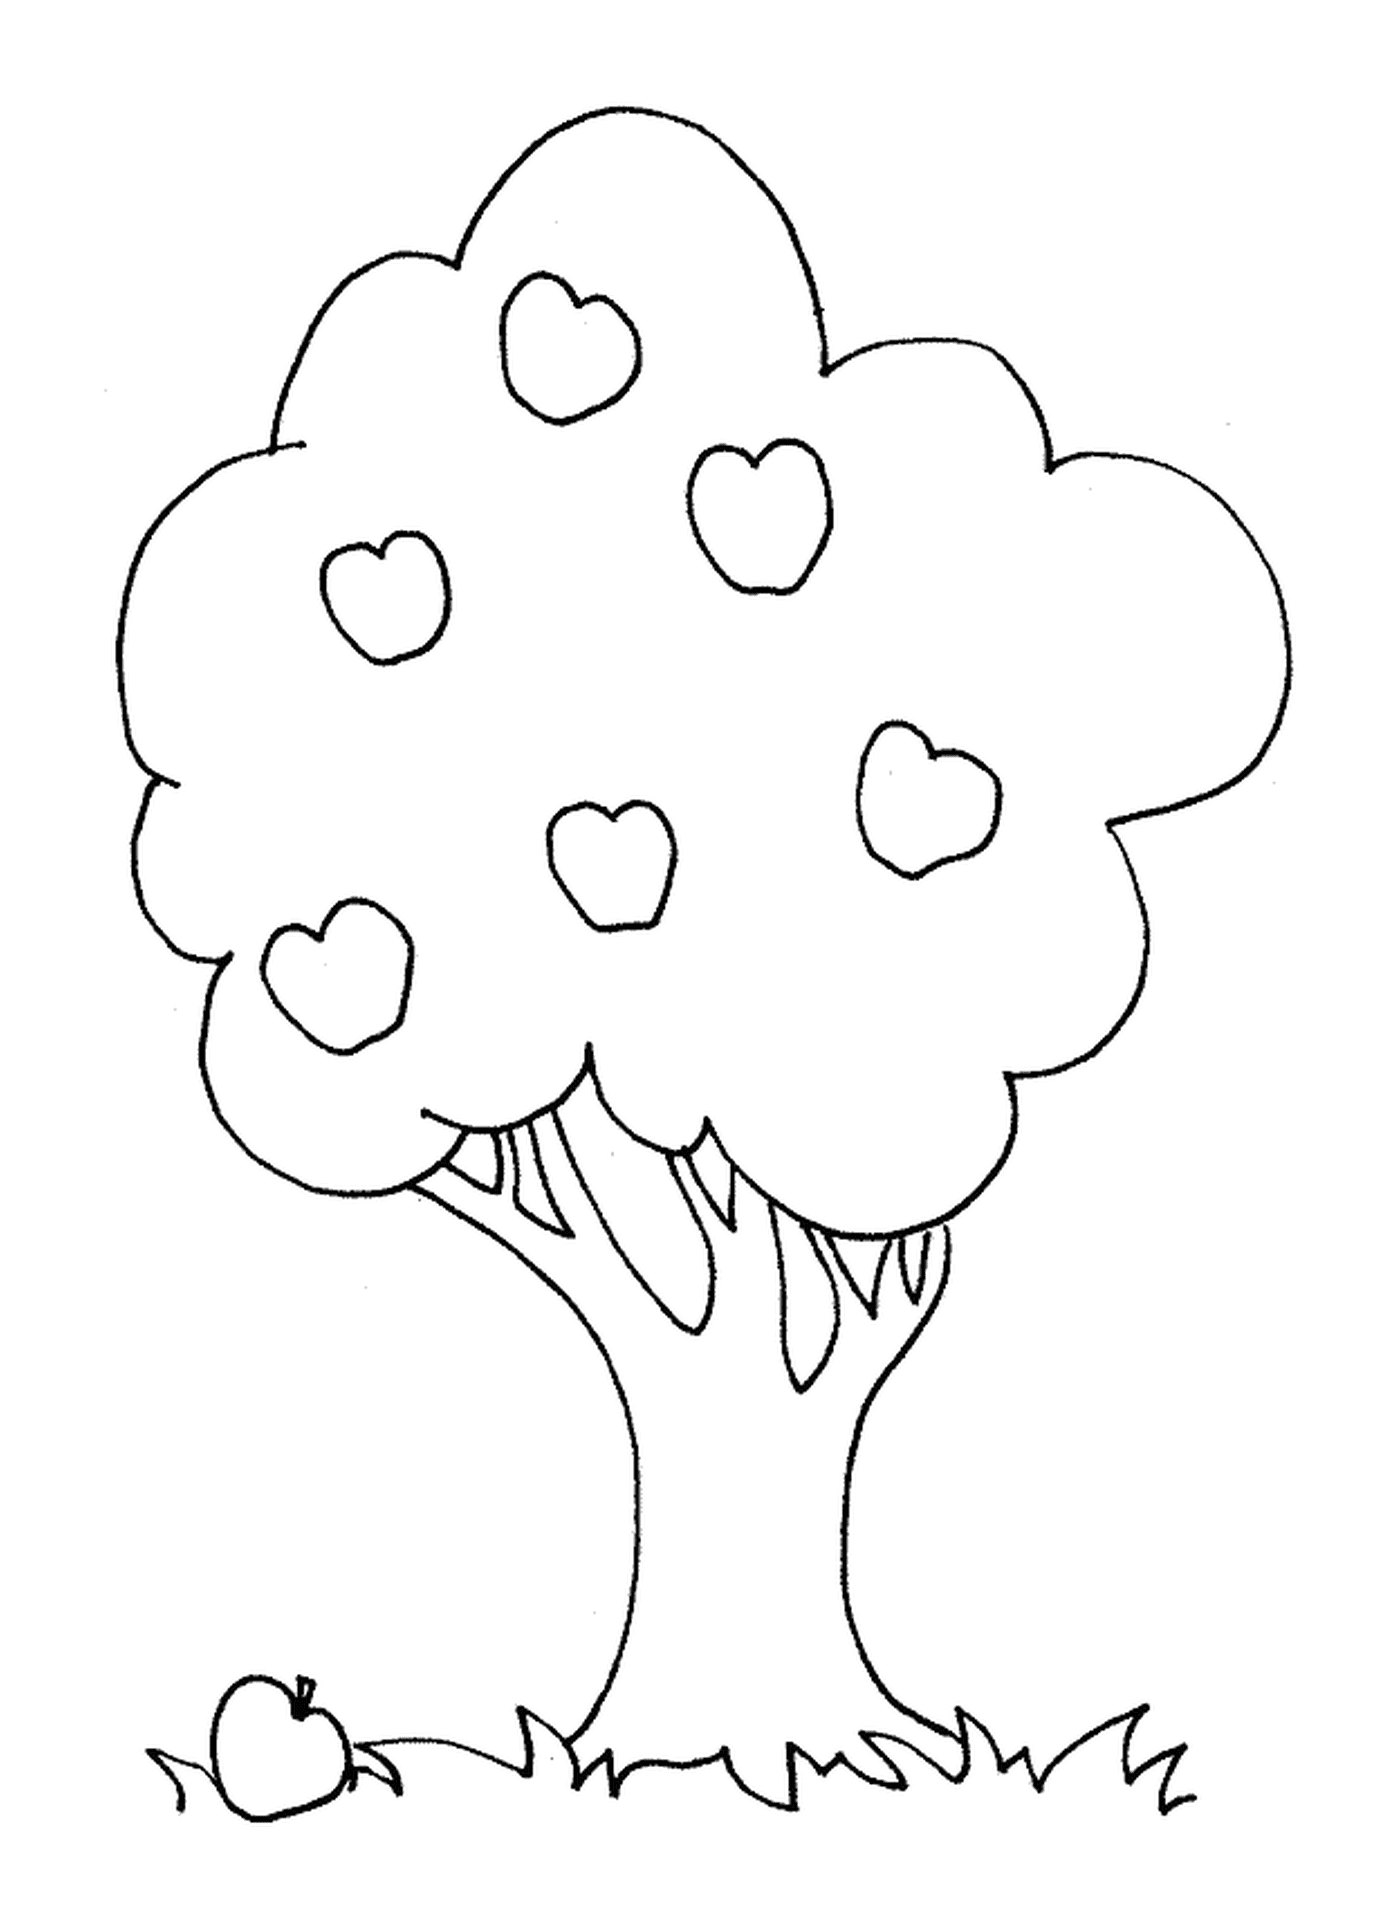  A tree with hearts 